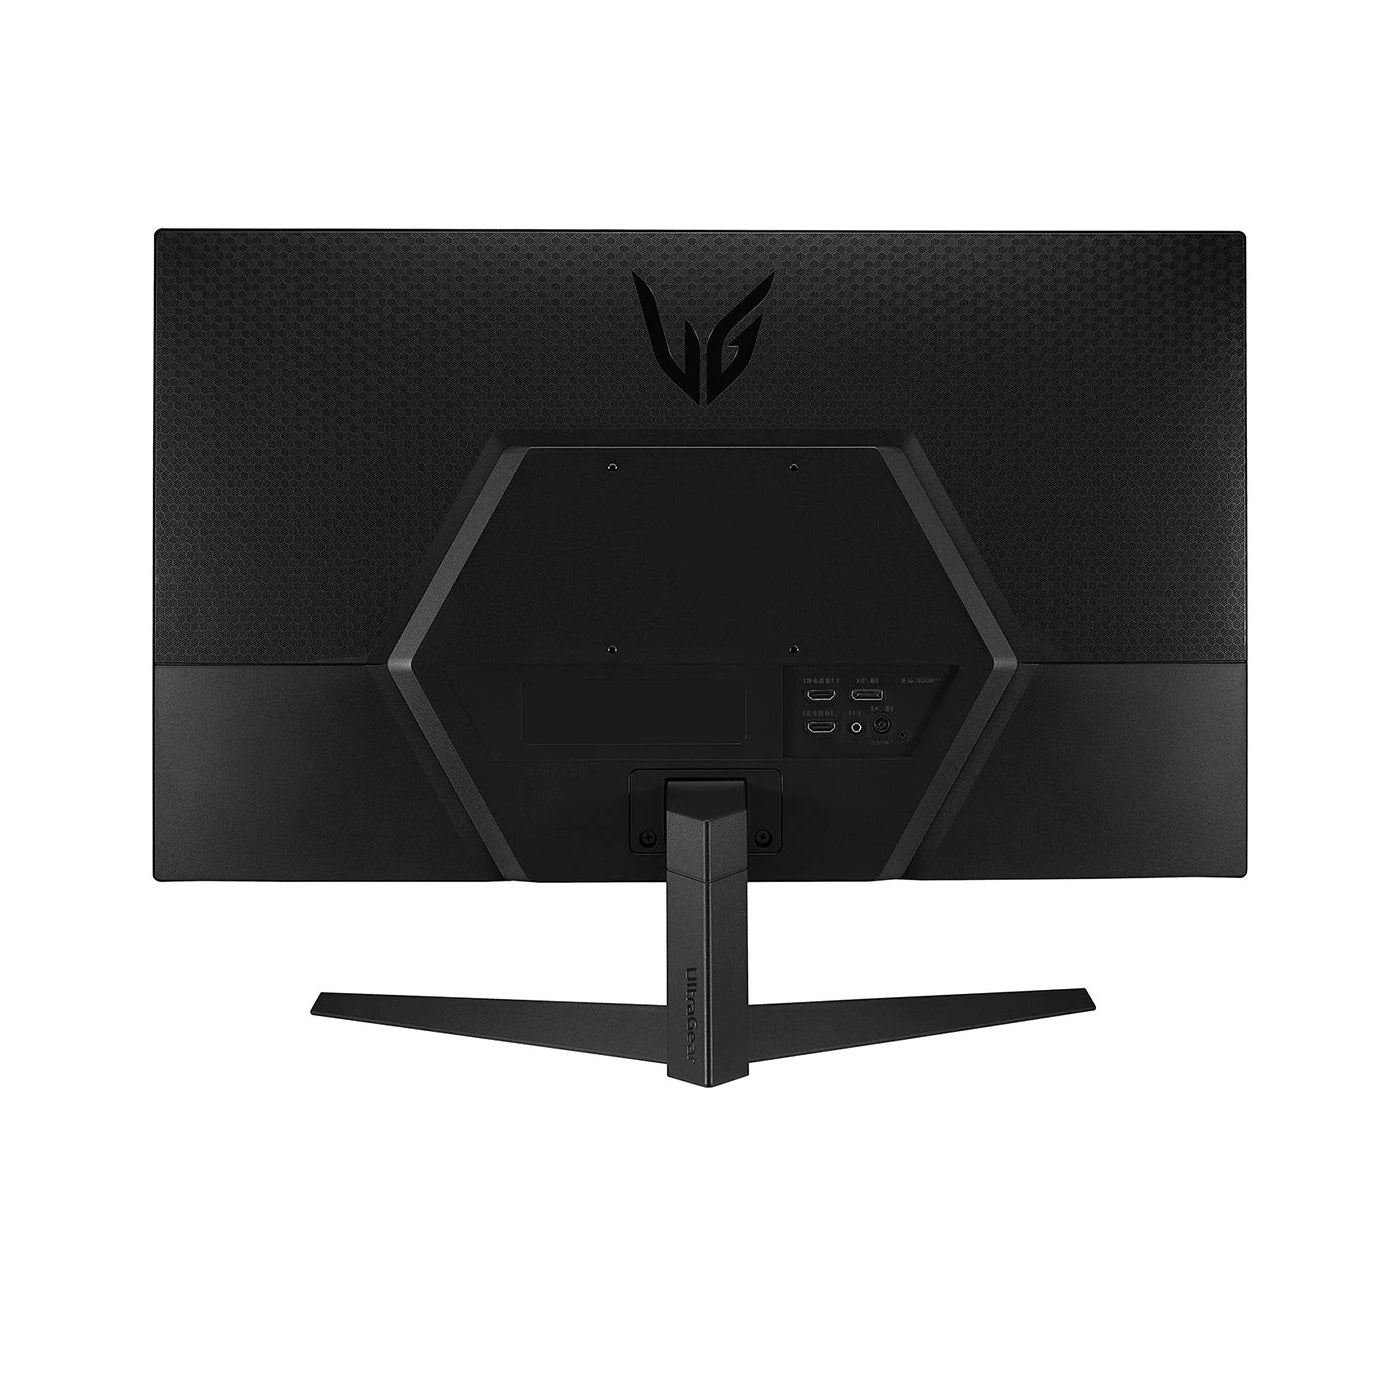 LG 27GQ50F-B UltraGear 27" Fhd 165hz 1ms Mbr Gaming Monitor (Brand New) Best computer monitor, gaming monitor, professional monitor, monitor for sale in Lebanon, monitor in Lebanon, laptops king Lebanon